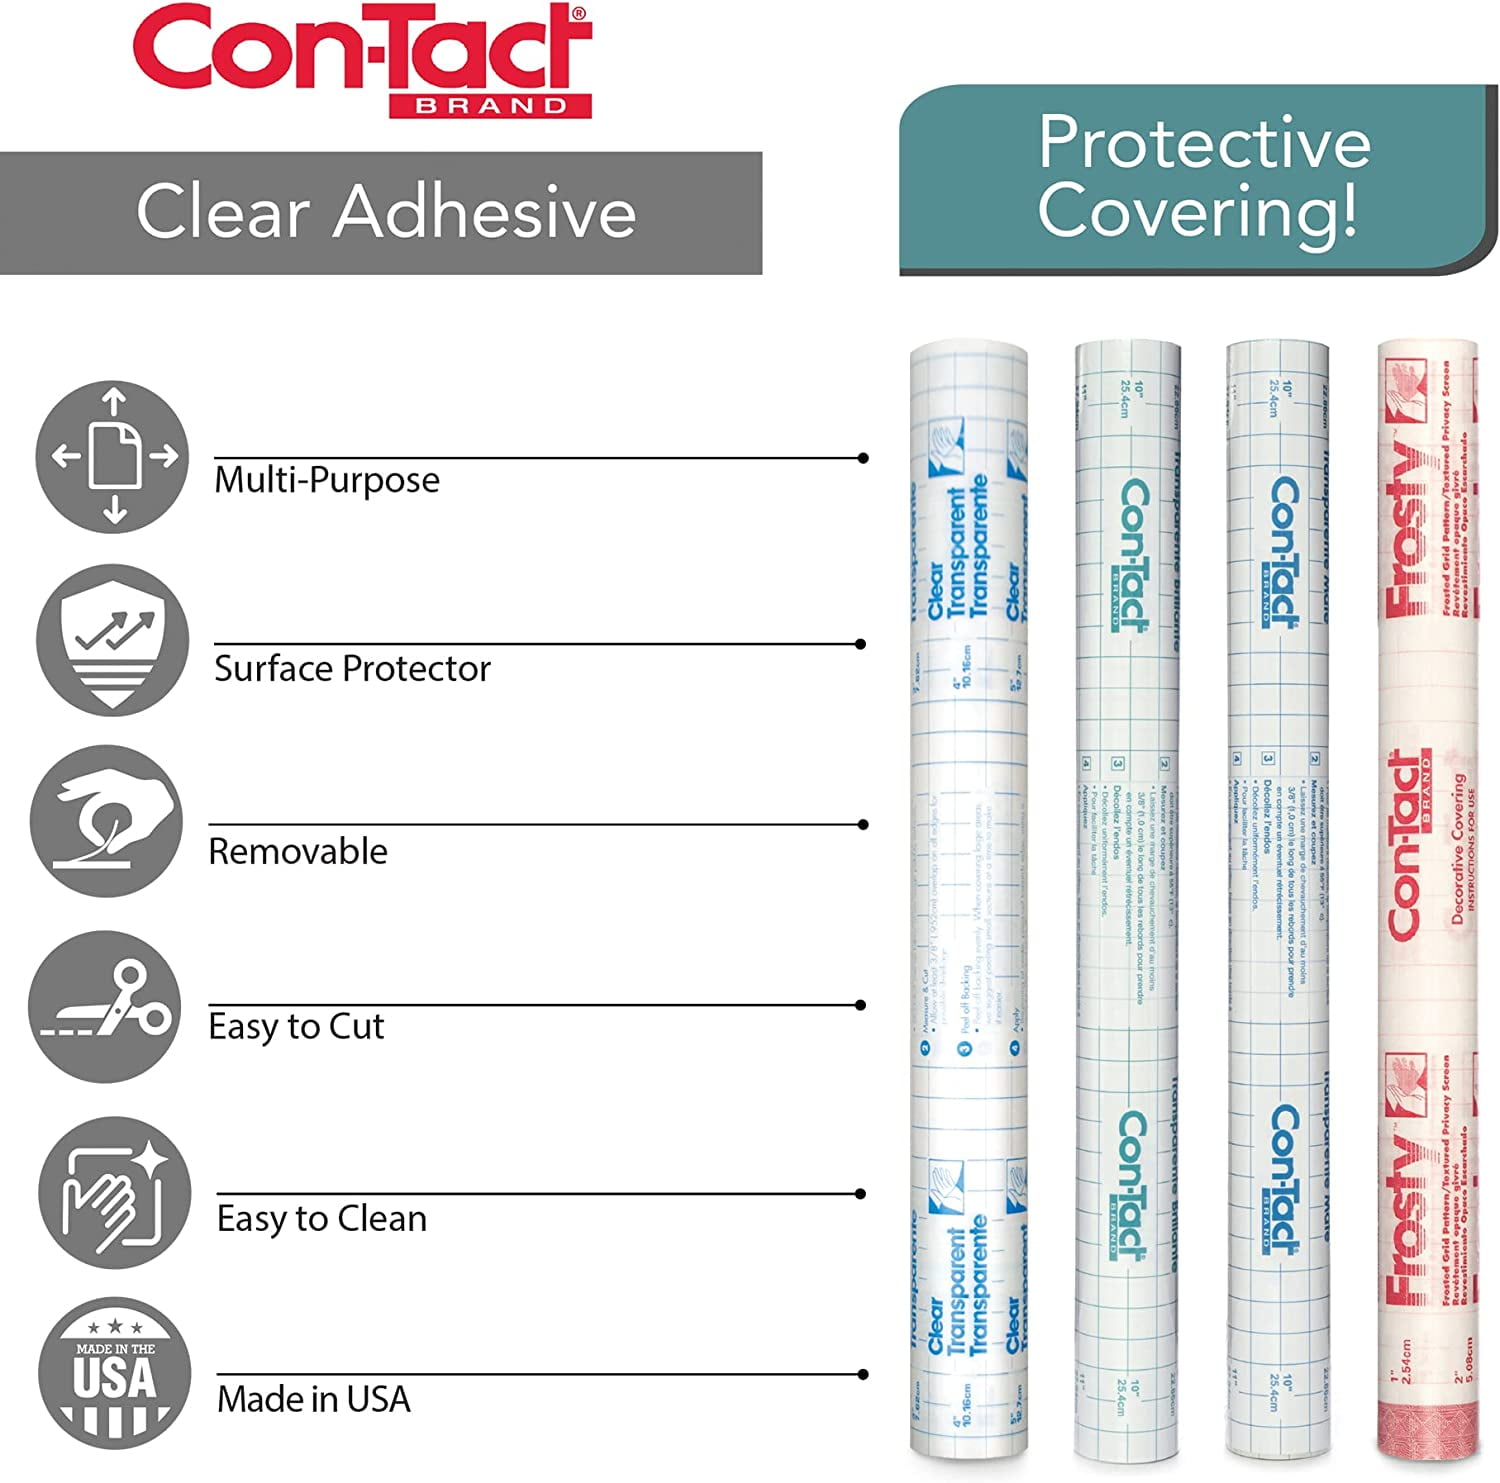 Con-Tact Brand Self-Adhesive Clear Protective Liner Books/Documents 18in x 9ft